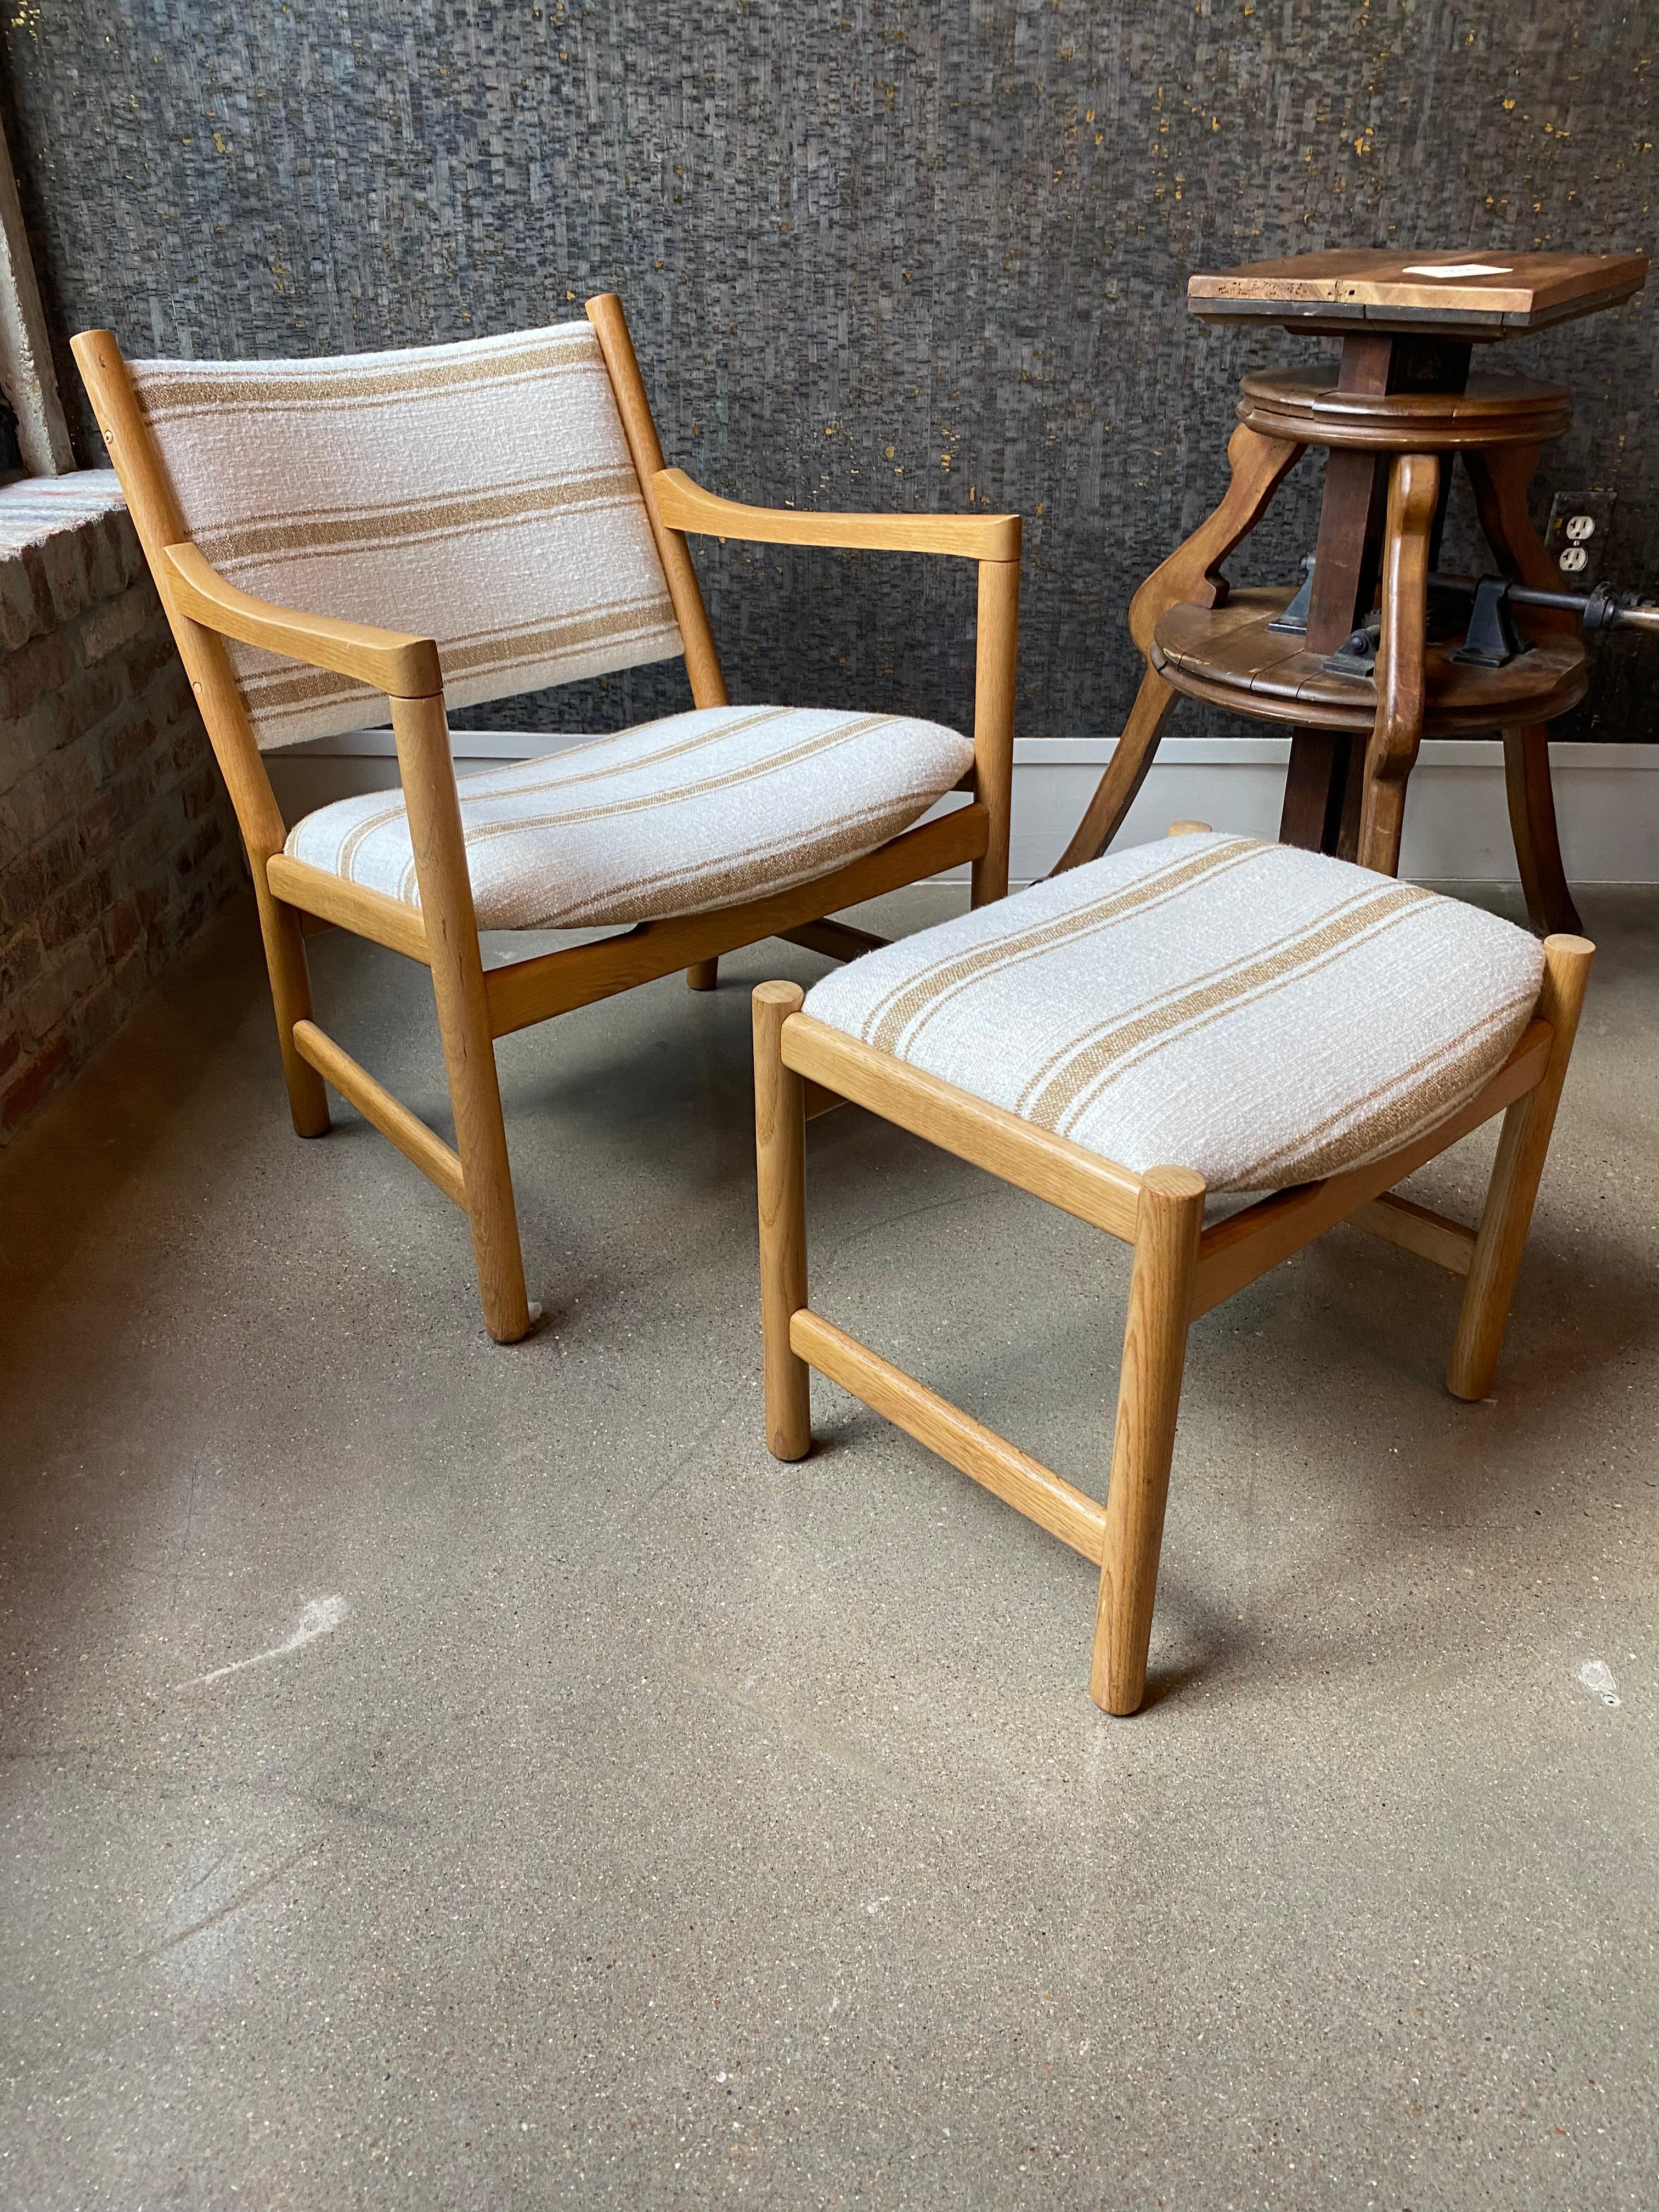 Mid-century Scandinavian/Danish chair with oak frame and upholstered seat and back. The chair comes with a matching ottoman or footstool.  Newly upholstered in camel and white striped heavily woven linen by Bruder. This is a very comfortable set,